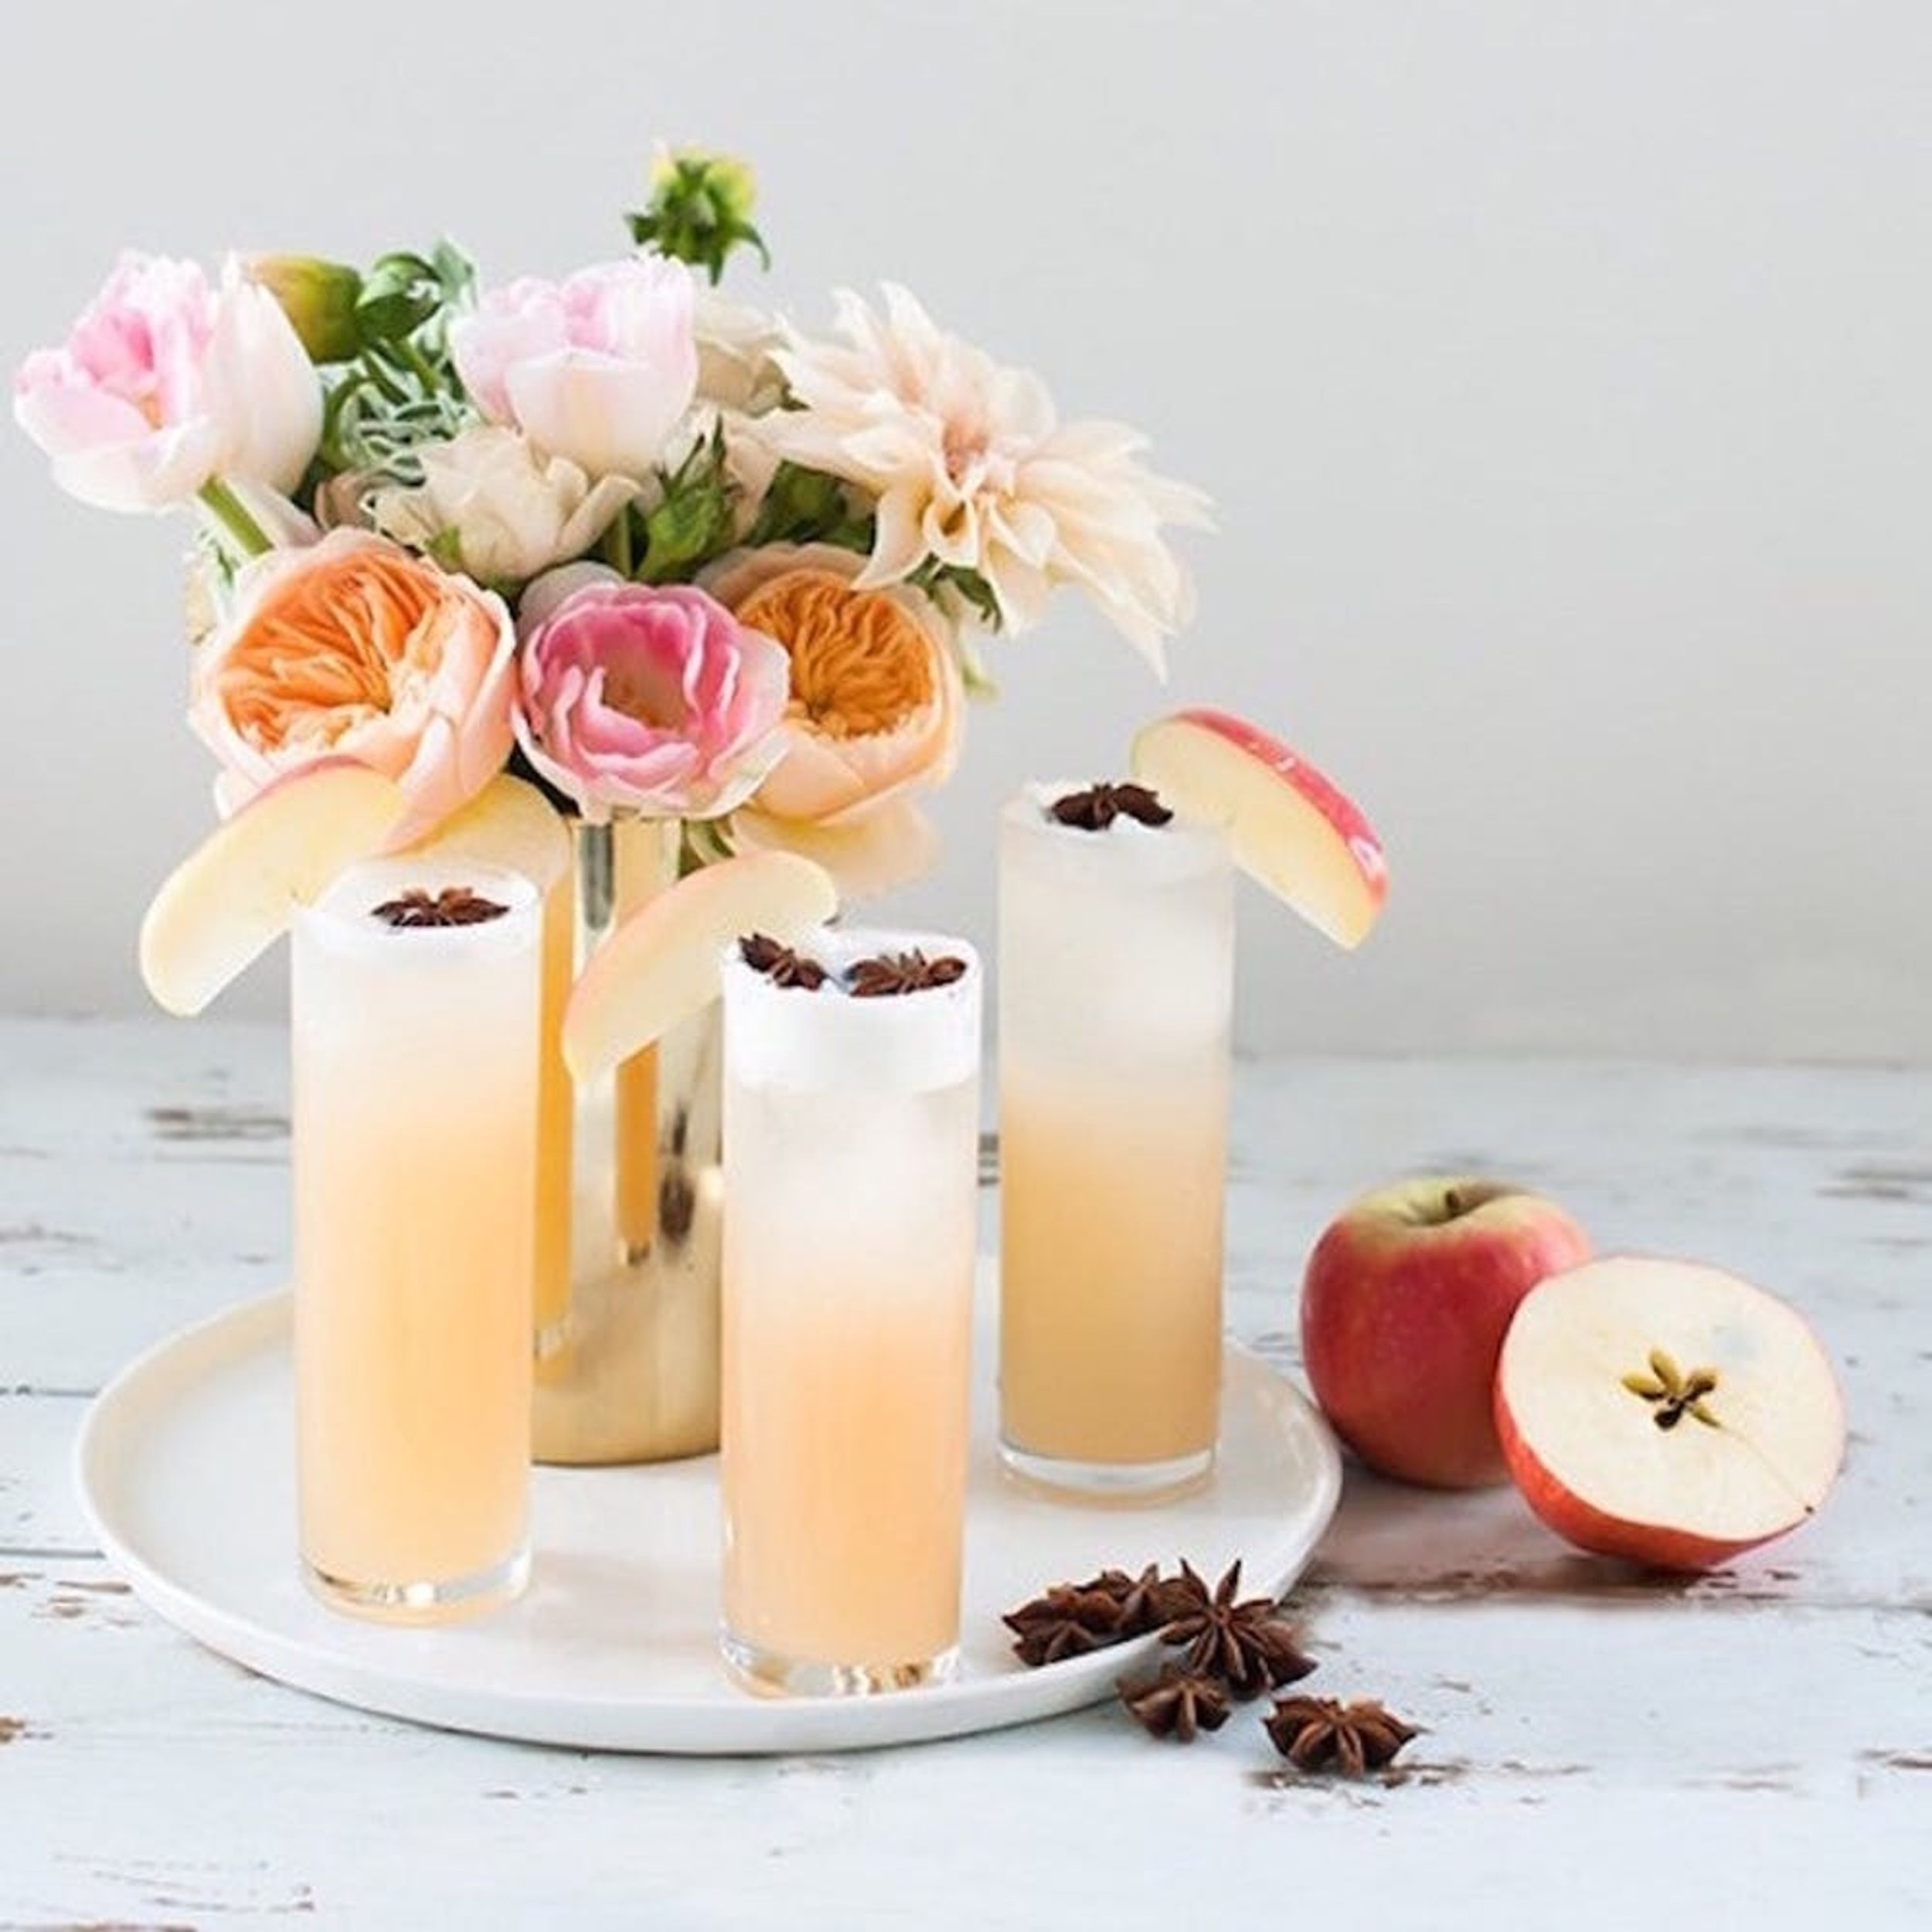 17 Sweet and Spicy Cocktails to Enjoy After You’ve Gone Apple Picking